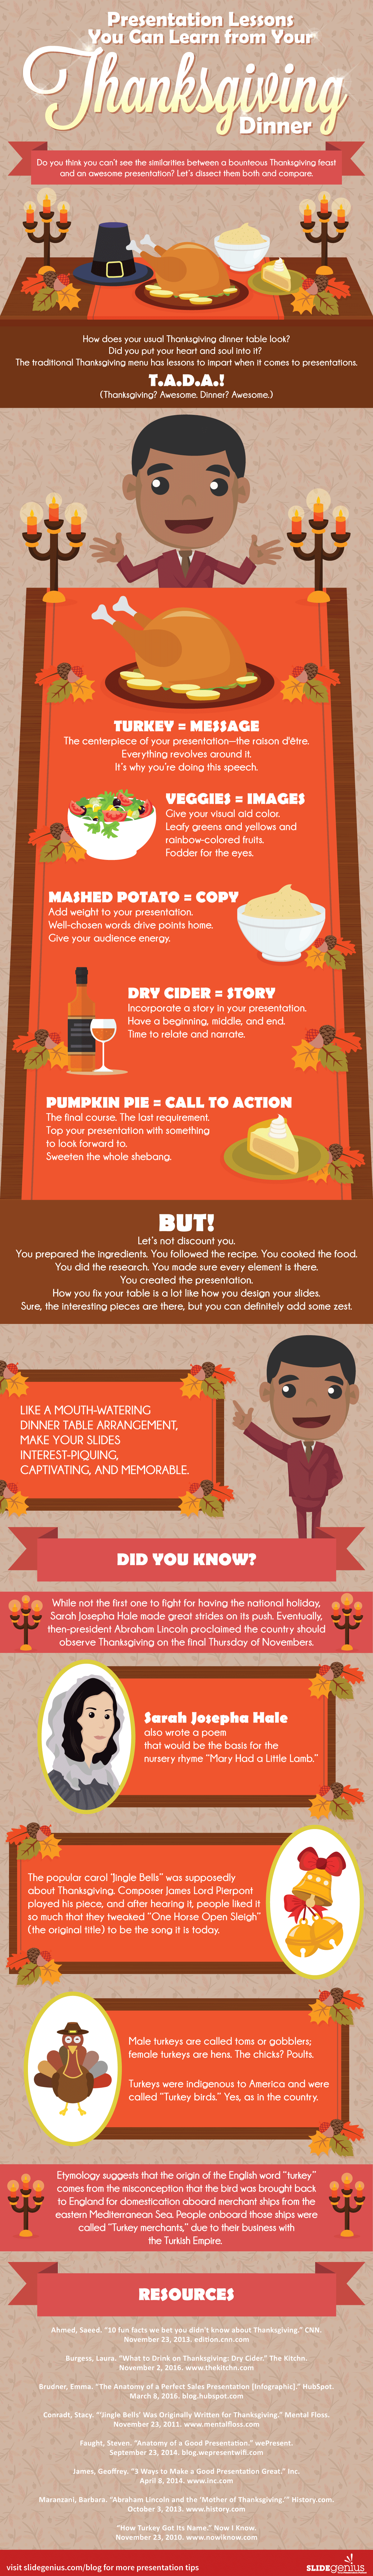 Presentation Lessons You Can Learn From Thanksgiving Dinner